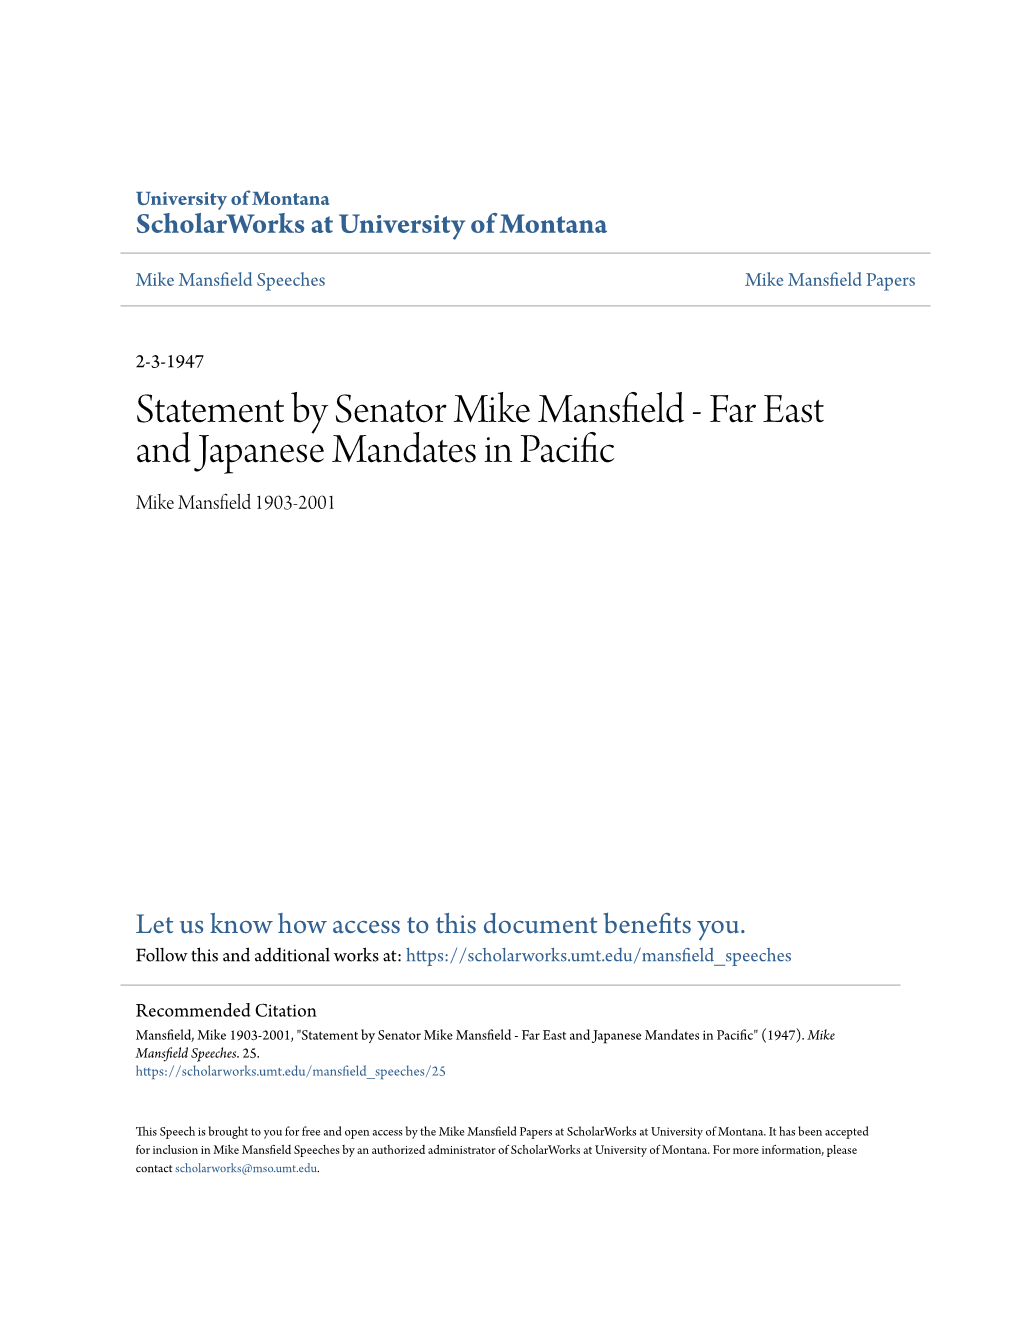 Statement by Senator Mike Mansfield - Af R East and Japanese Mandates in Pacific Mike Mansfield 1903-2001